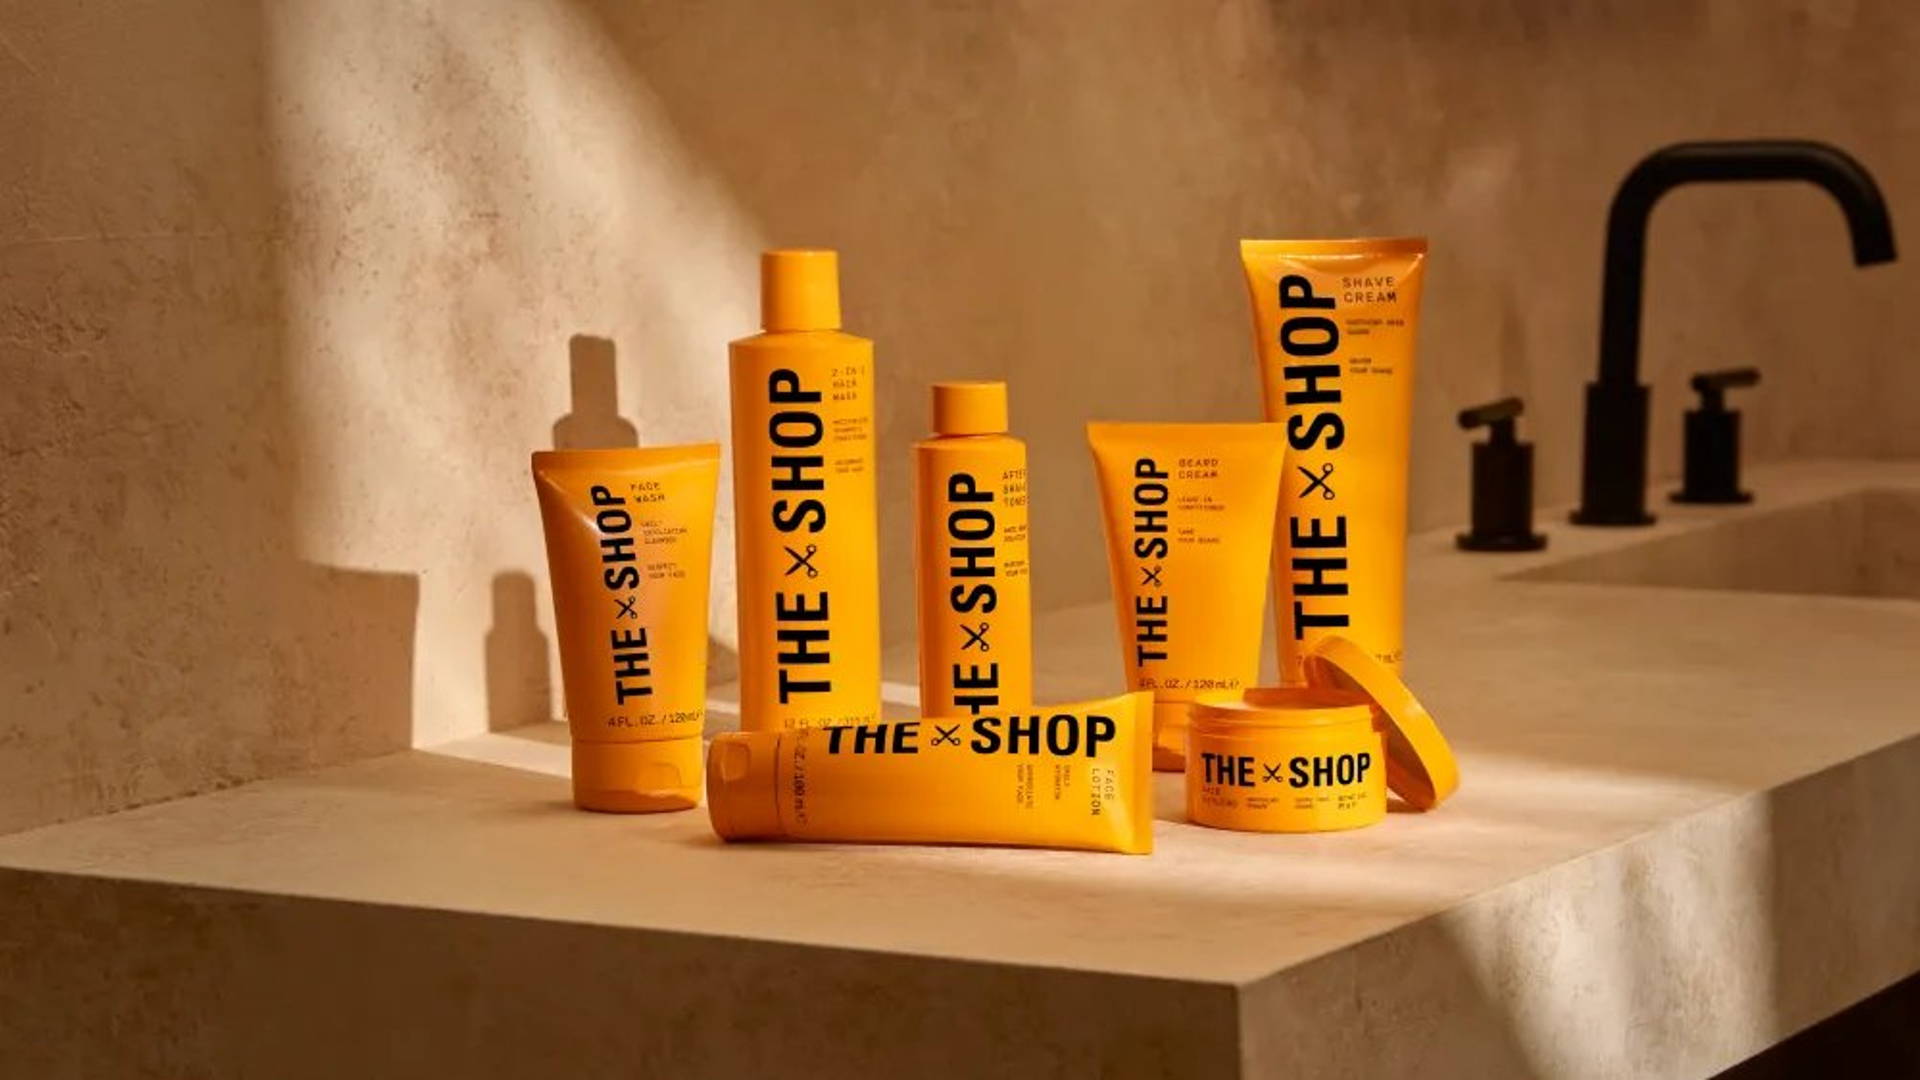 Featured image for Lebron James’ ‘The Shop’ Expands Beyond the Screen With New Line of Male Grooming Products